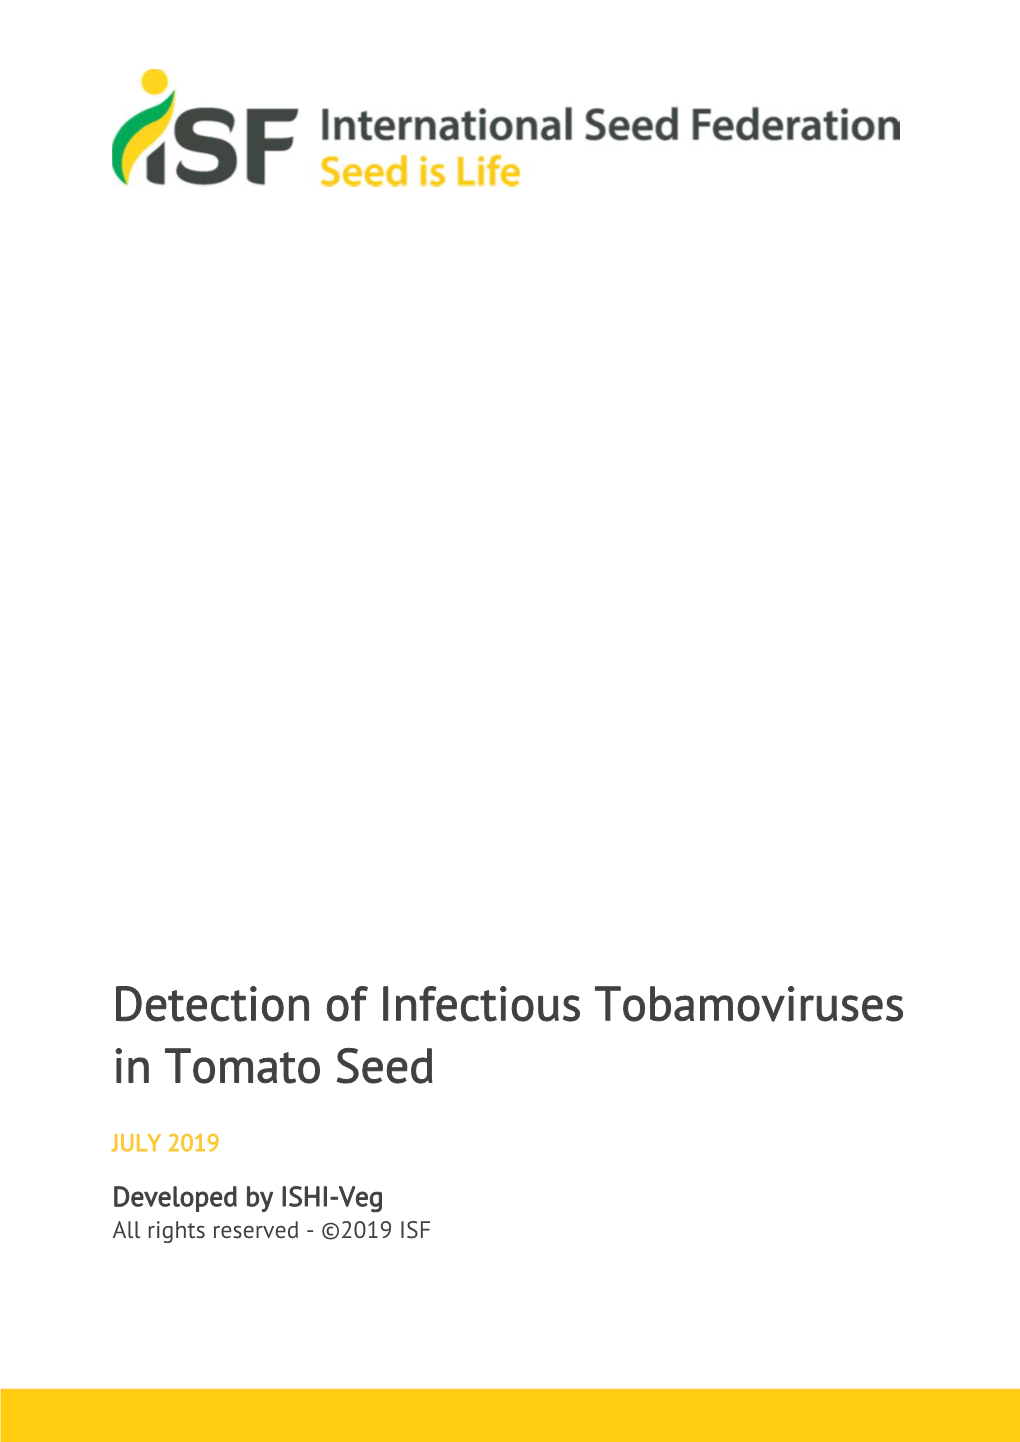 Detection of Infectious Tobamoviruses in Tomato Seed